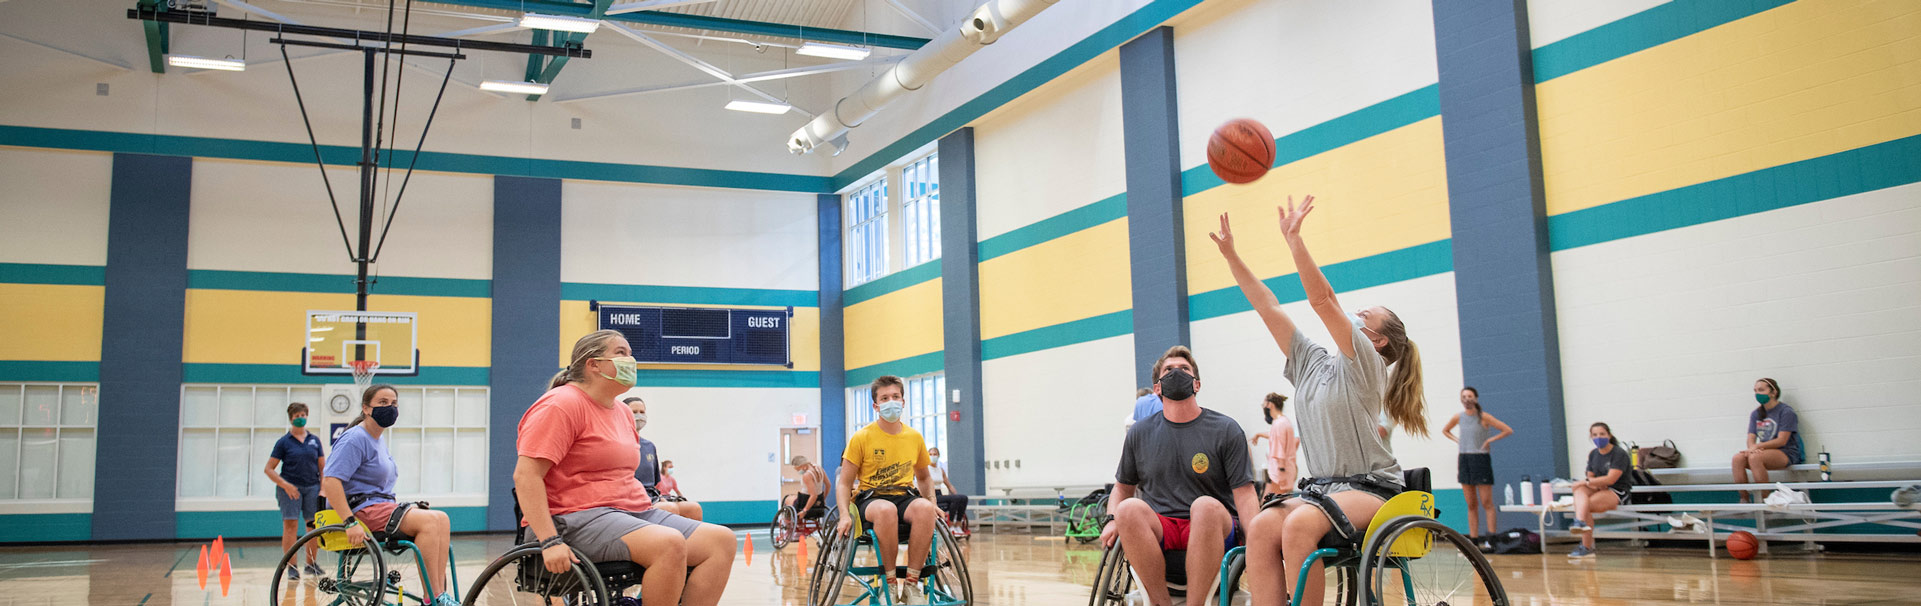 Students in wheelchairs playing basketball